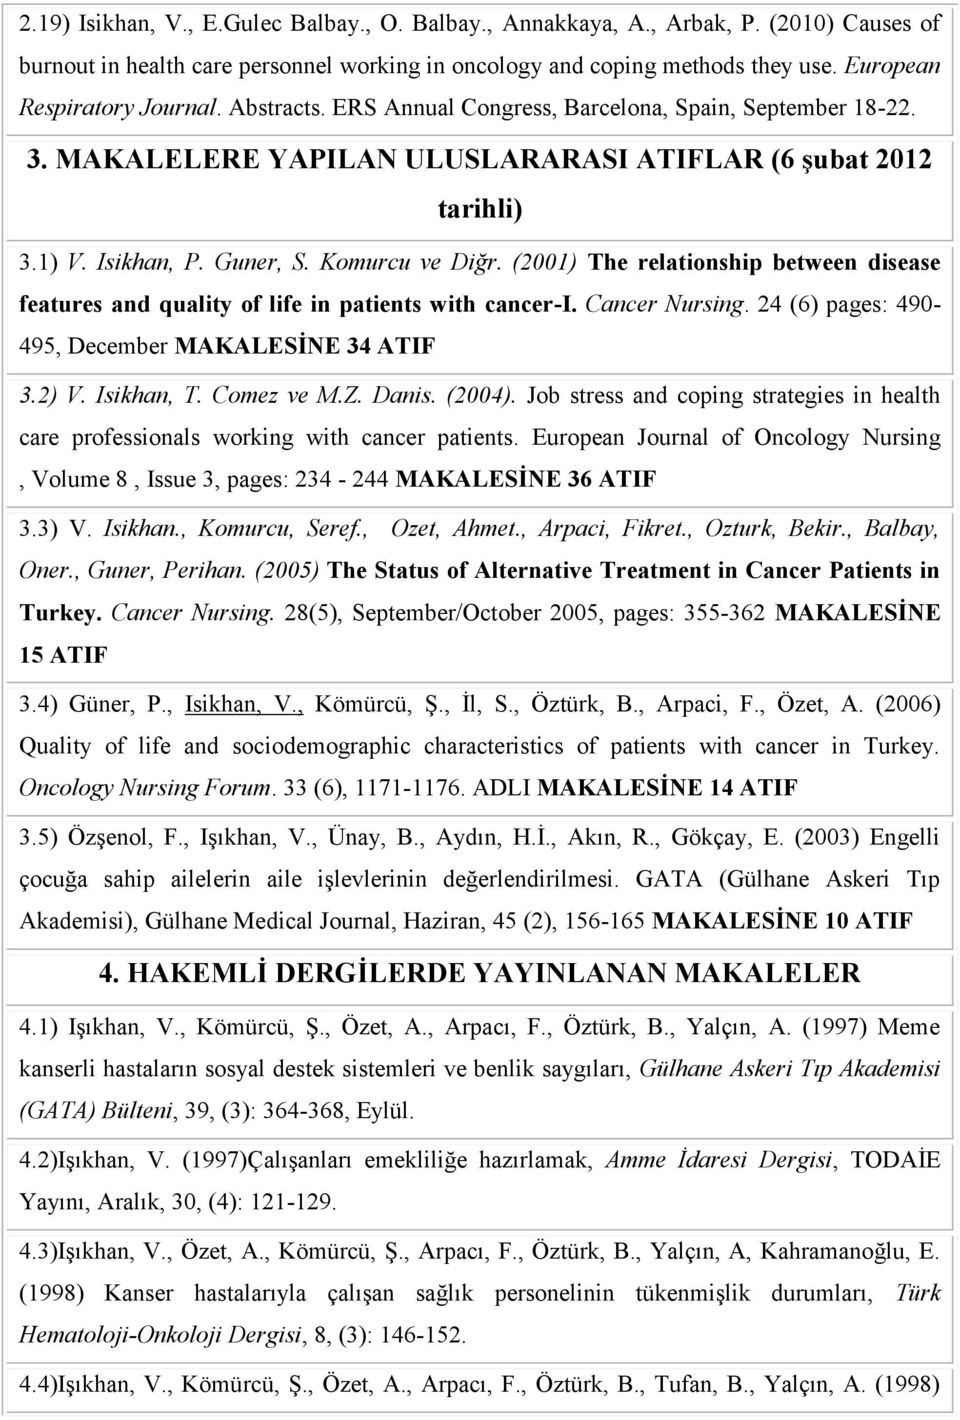 Komurcu ve Diğr. (2001) The relationship between disease features and quality of life in patients with cancer-i. Cancer Nursing. 24 (6) pages: 490-495, December MAKALESİNE 34 ATIF 3.2) V. Isikhan, T.